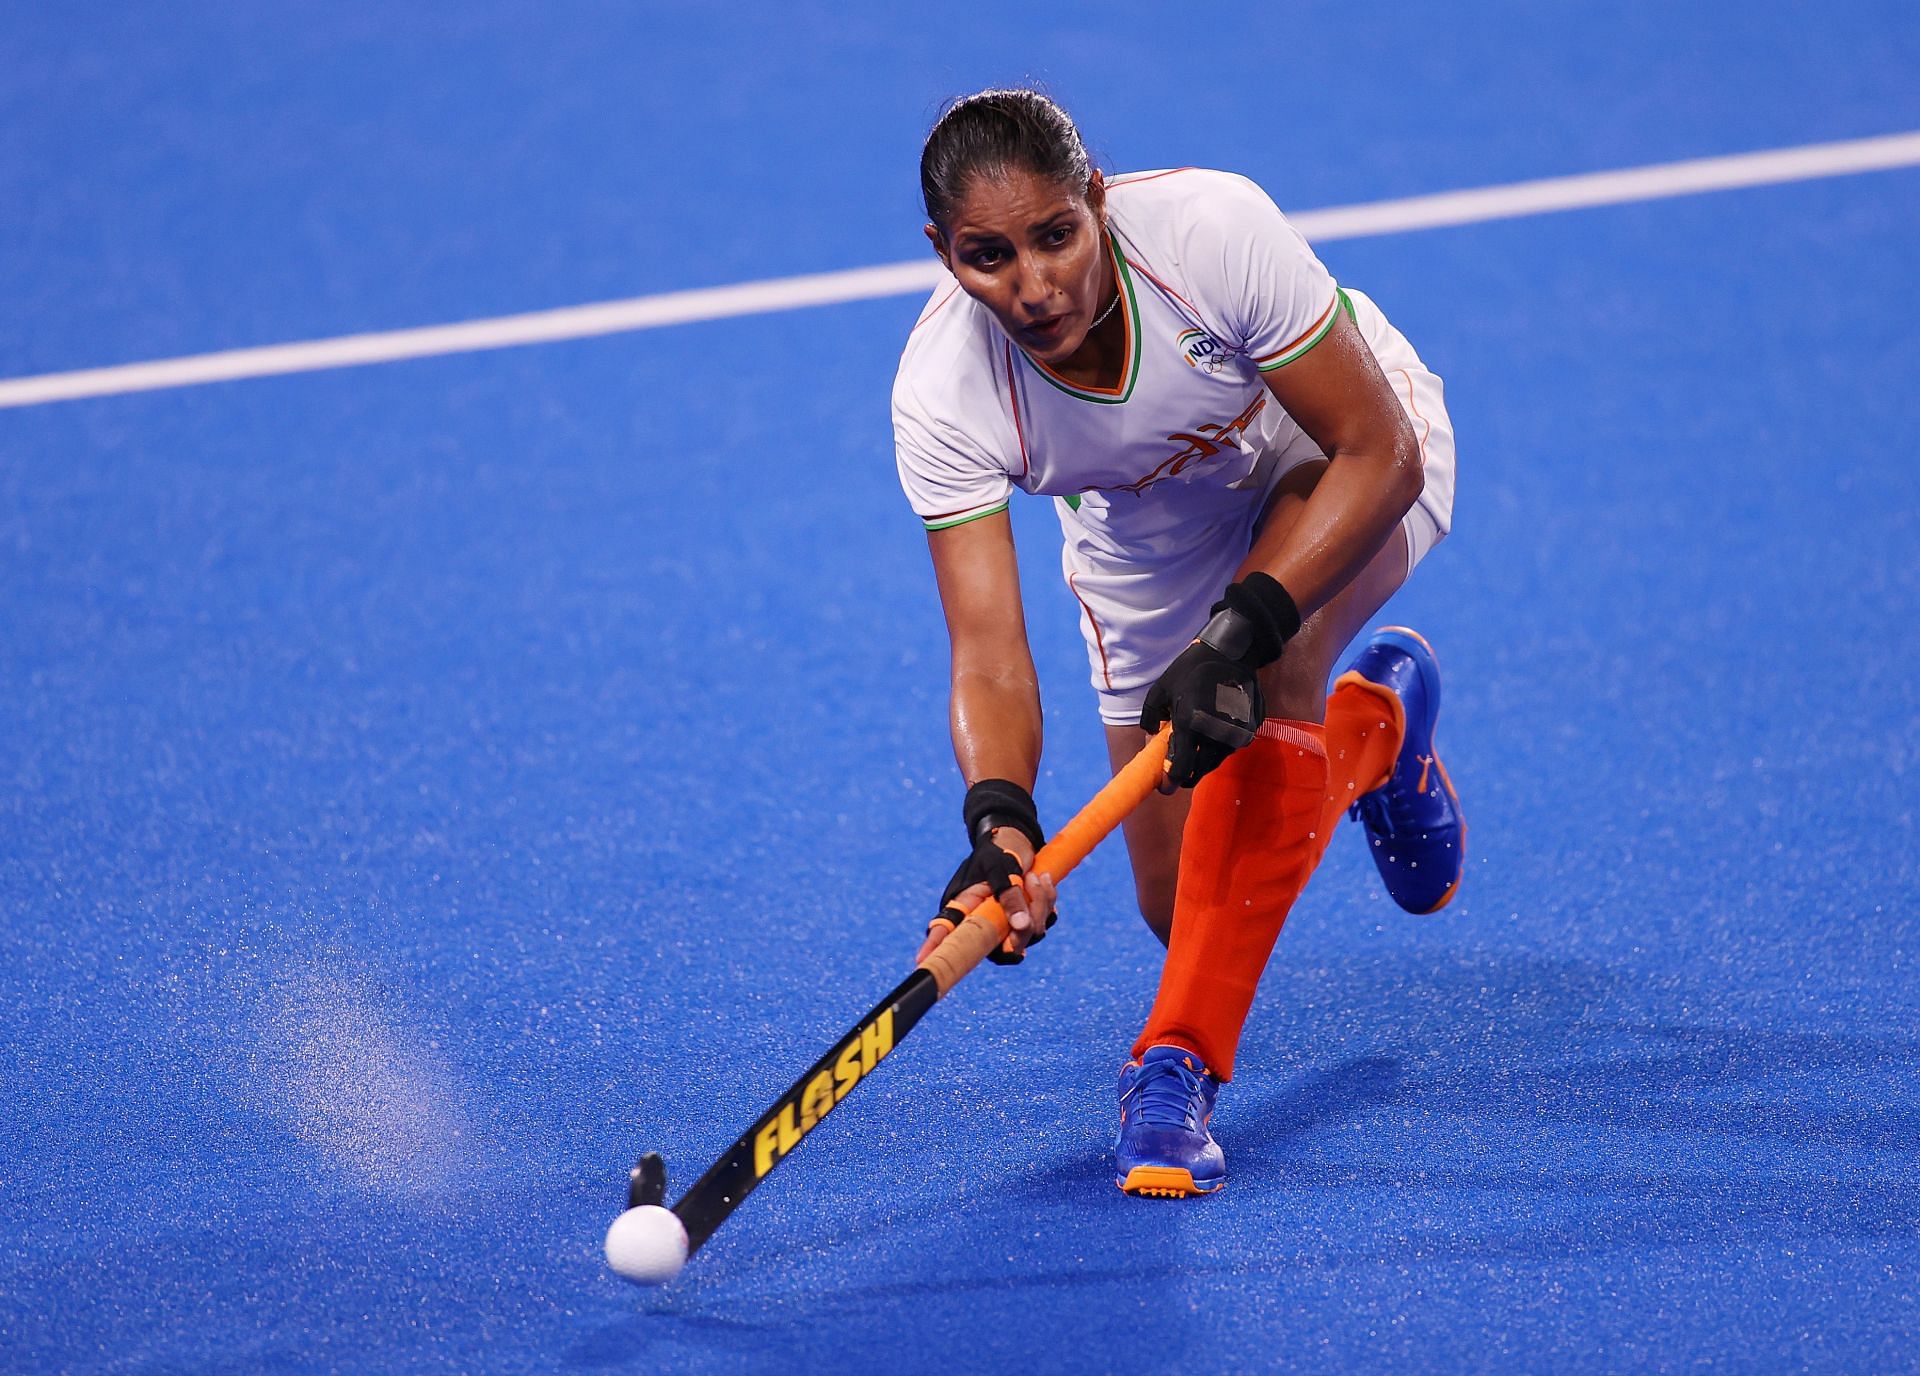 Punjab has proud one of India&#039;s finest drag-flick specialists in recent times in the form of Gurjit Kaur.